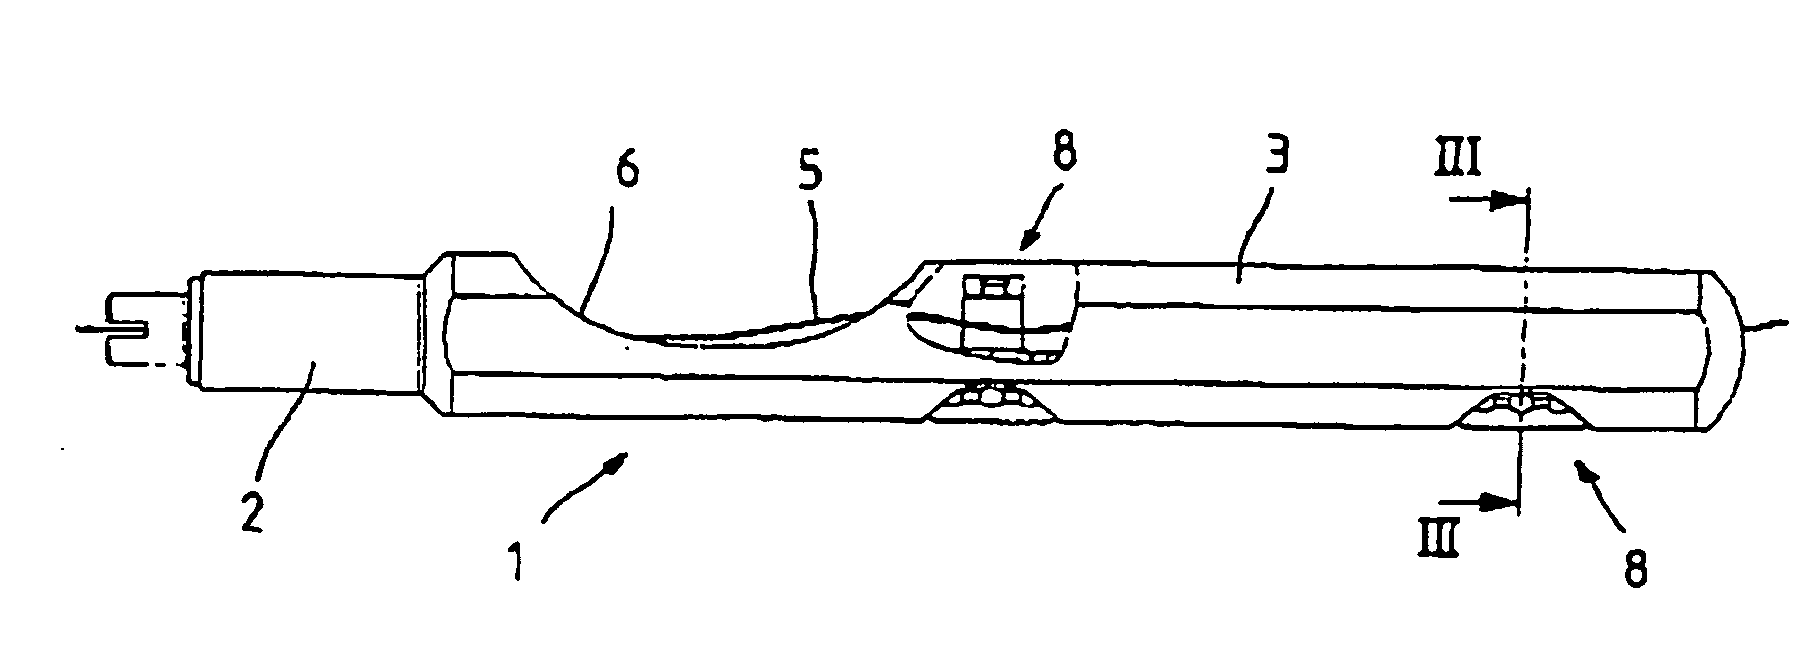 Device for guiding surgical sewing material to a needle